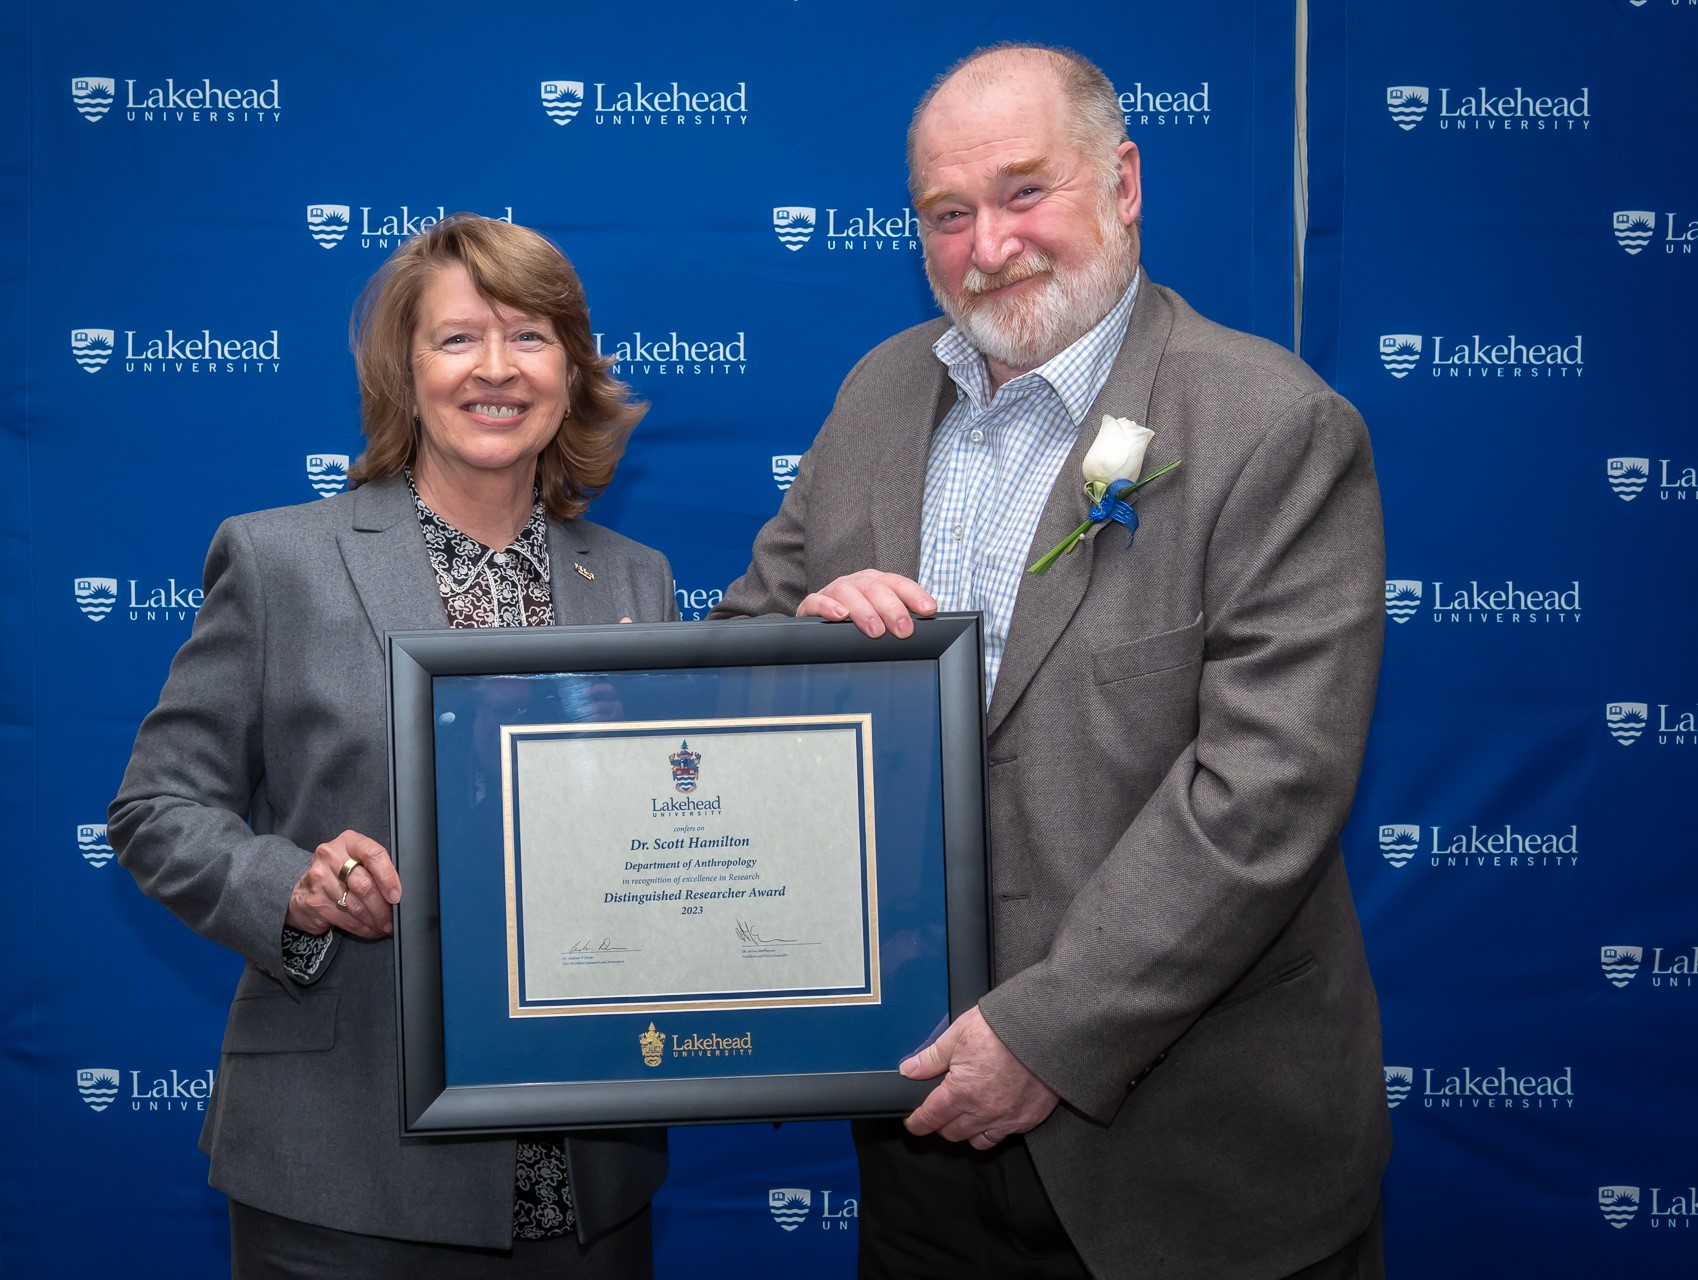 Photo of Distinguished Researcher Award Winner, Dr. Scott Hamilton, (SSHRC Category), Department of Anthropology, with Dr. Moira McPherson President and Vice-Chancellor, Lakehead University